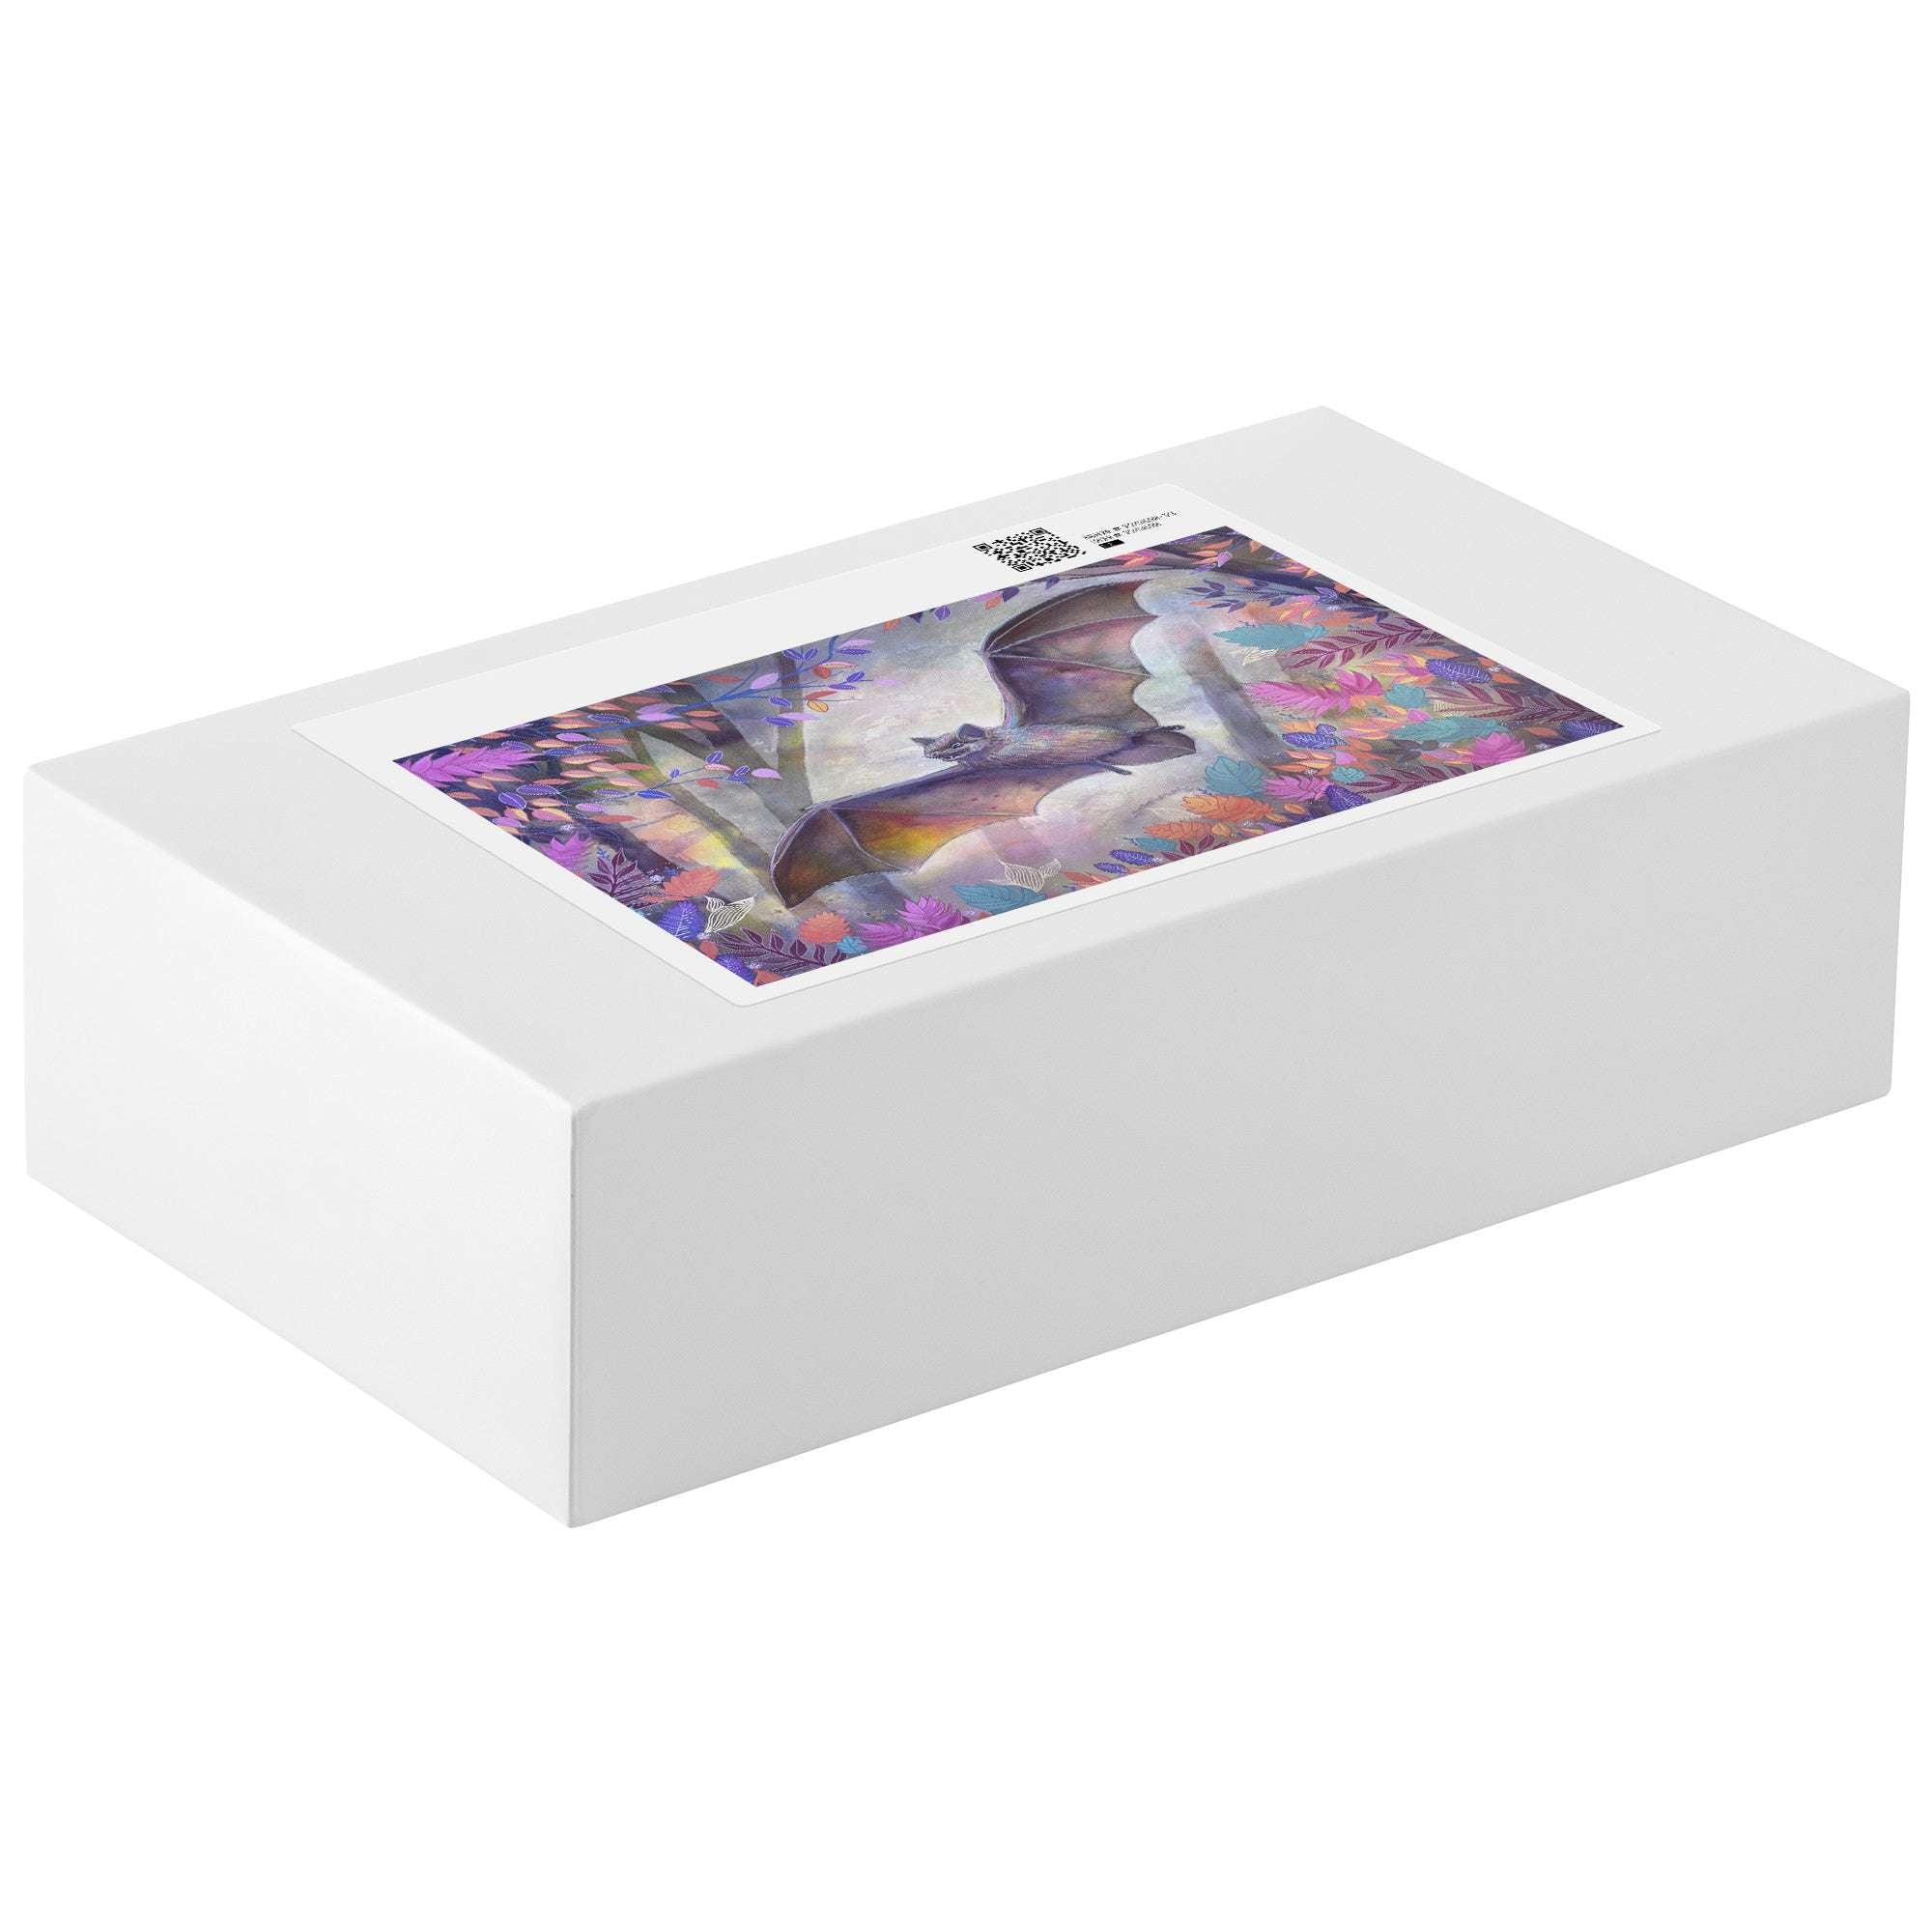 Rectangular plain white puzzle box with a large sticker on the lid displaying colorful abstract bat art on a plain background.